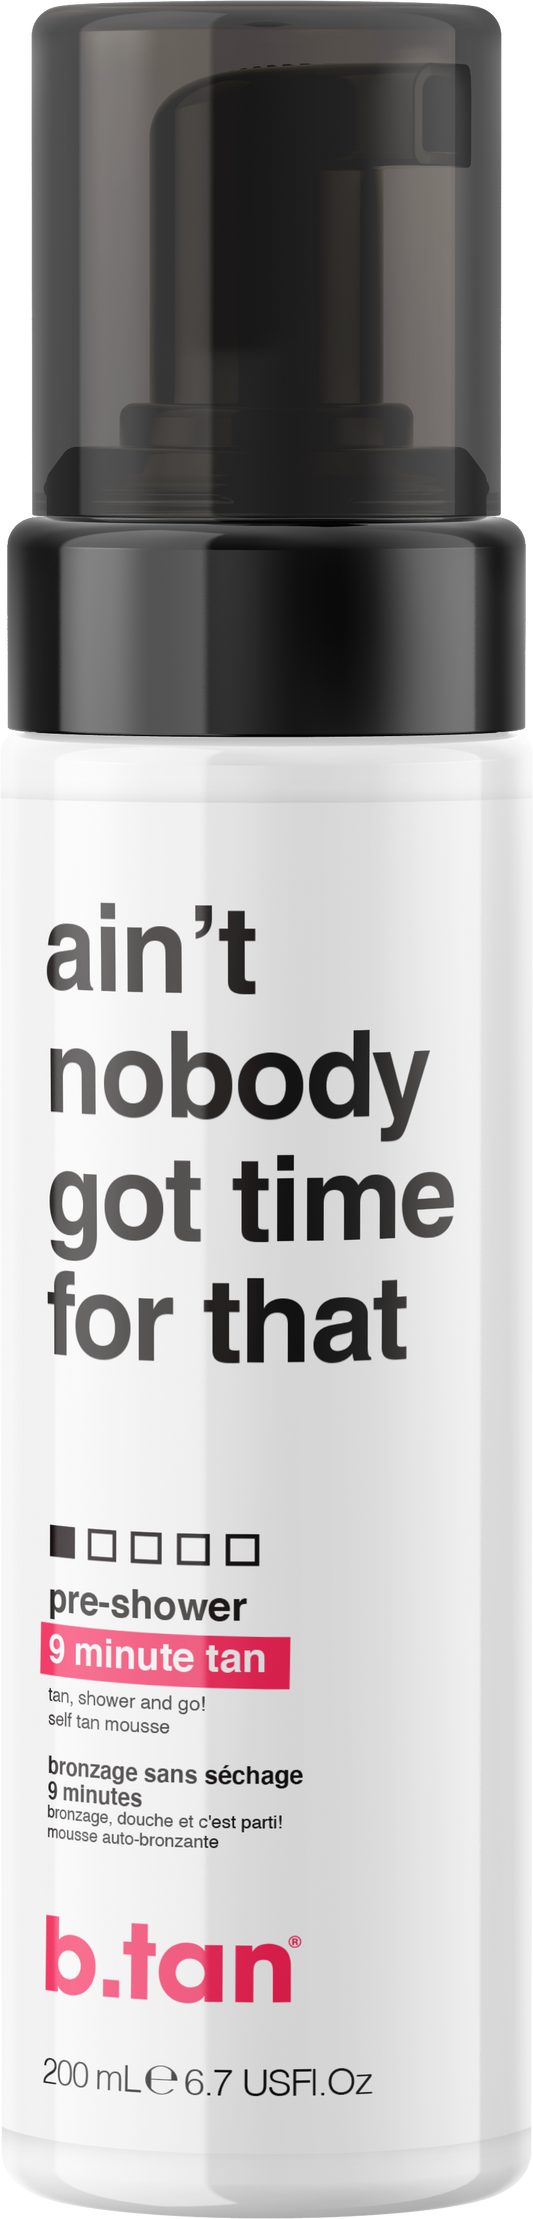 BTAN ain't nobody got time for that ... pre shower mousse